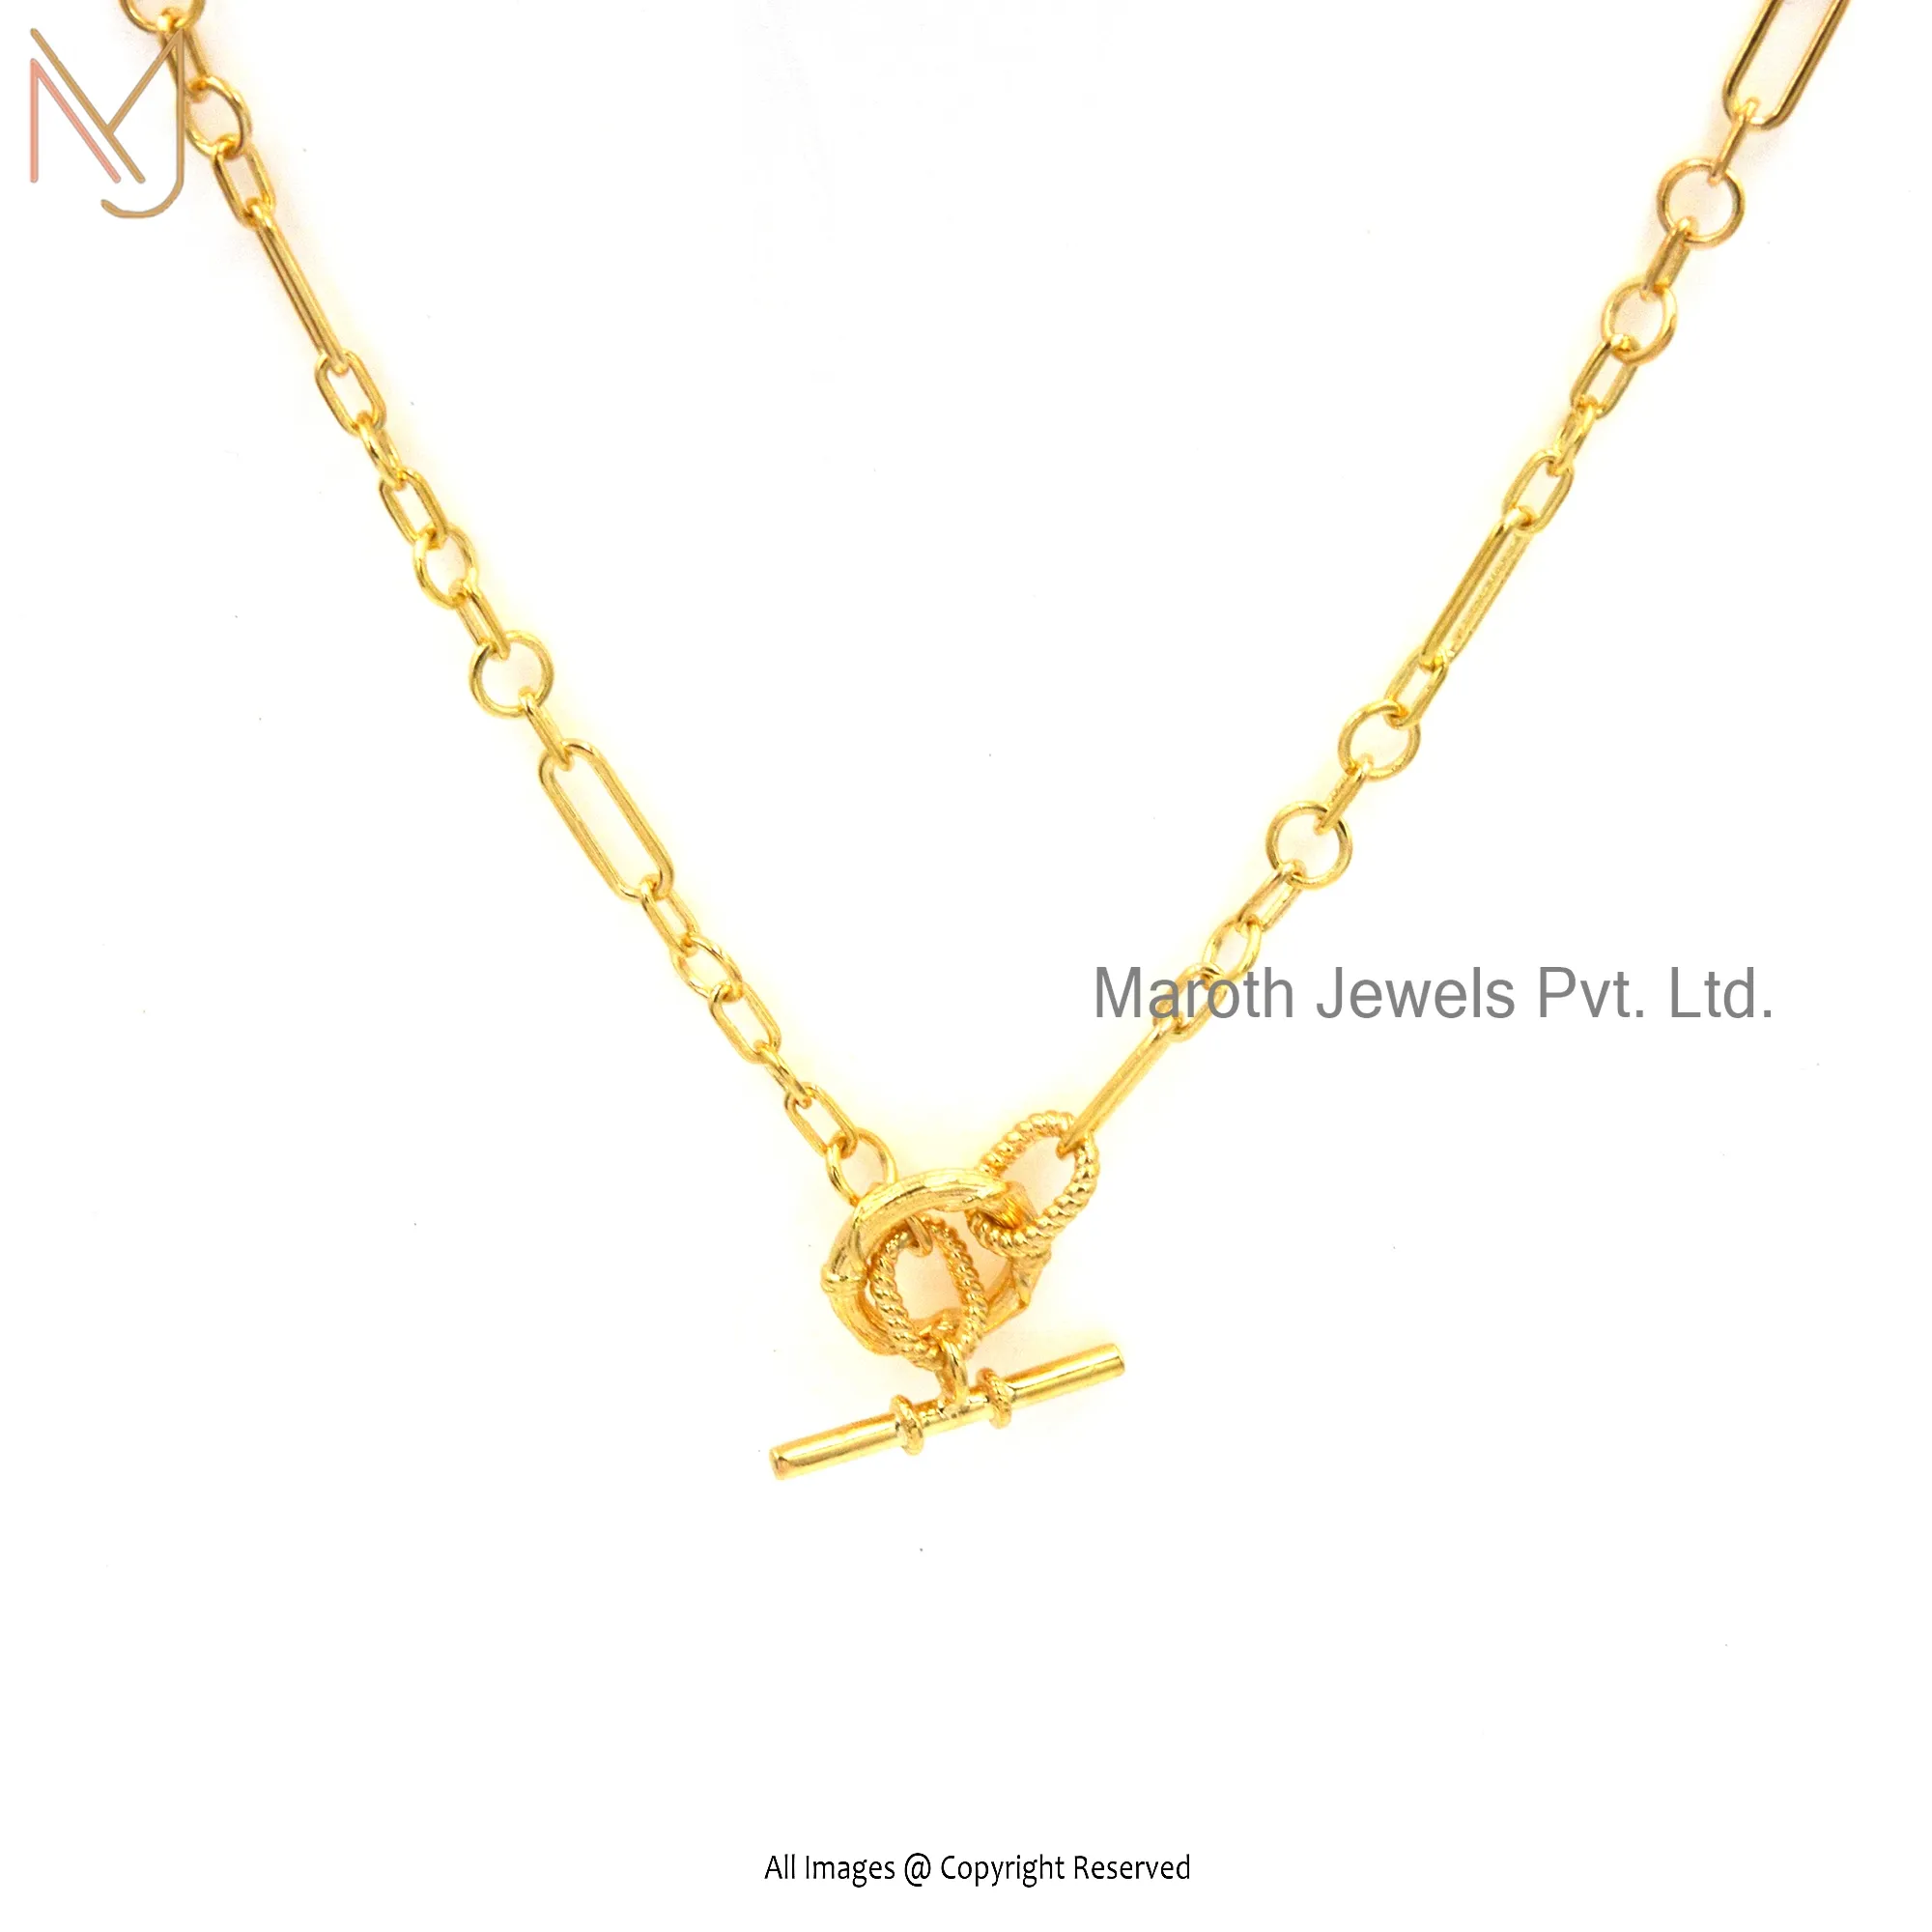 Private Label 925 Silver Yellow Gold Plated Chain Necklace